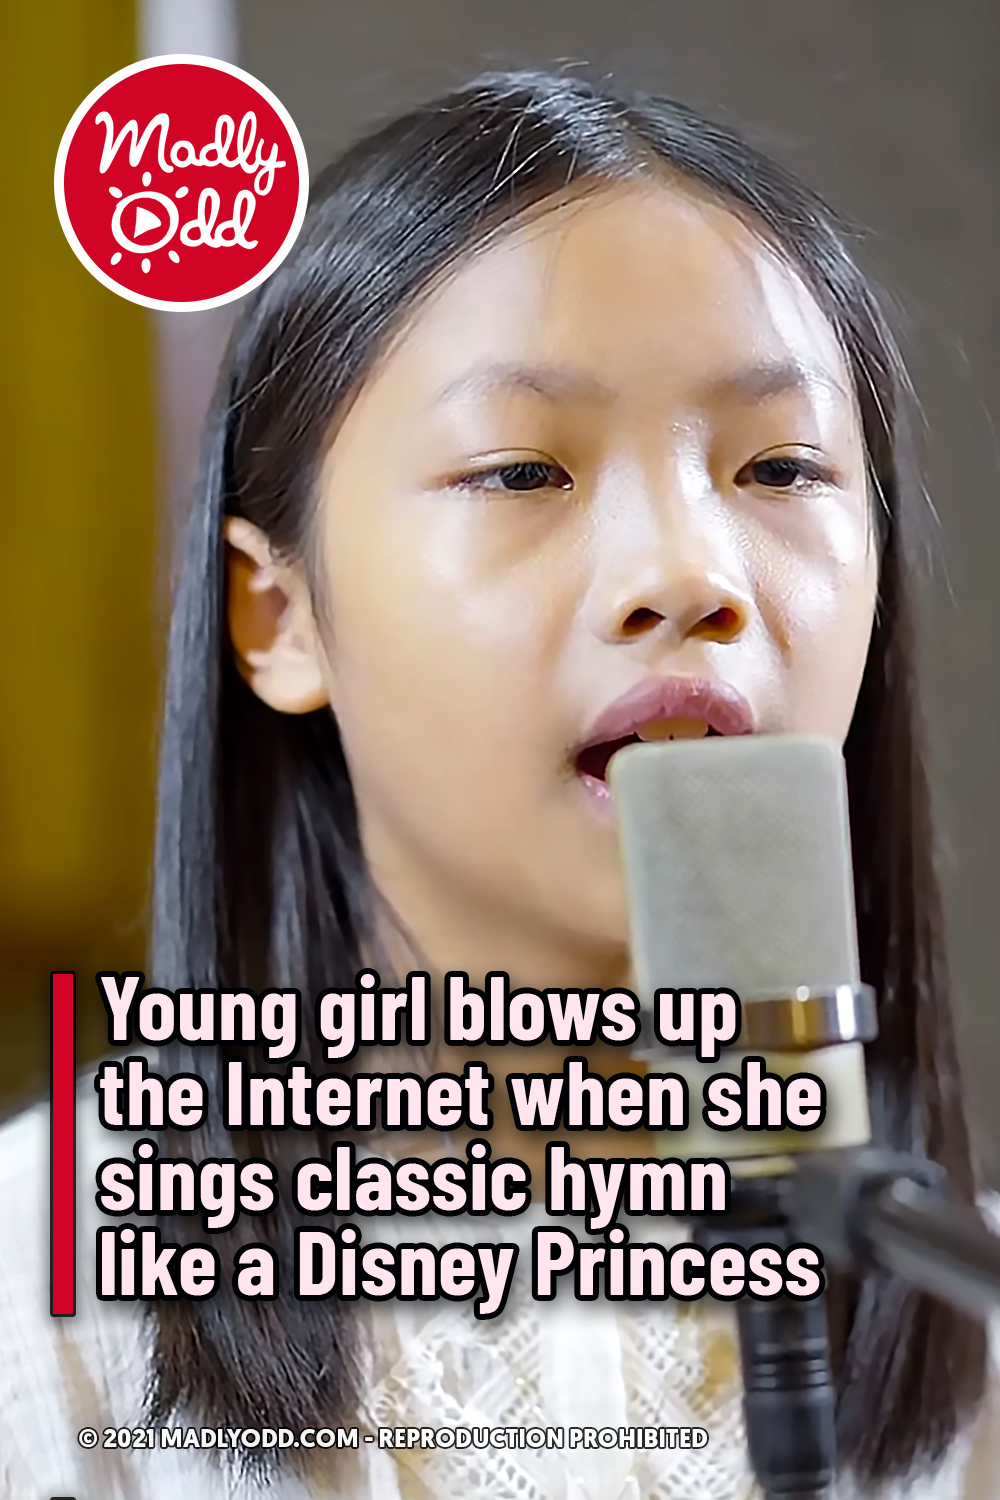 Young girl blows up the Internet when she sings classic hymn like a Disney Princess